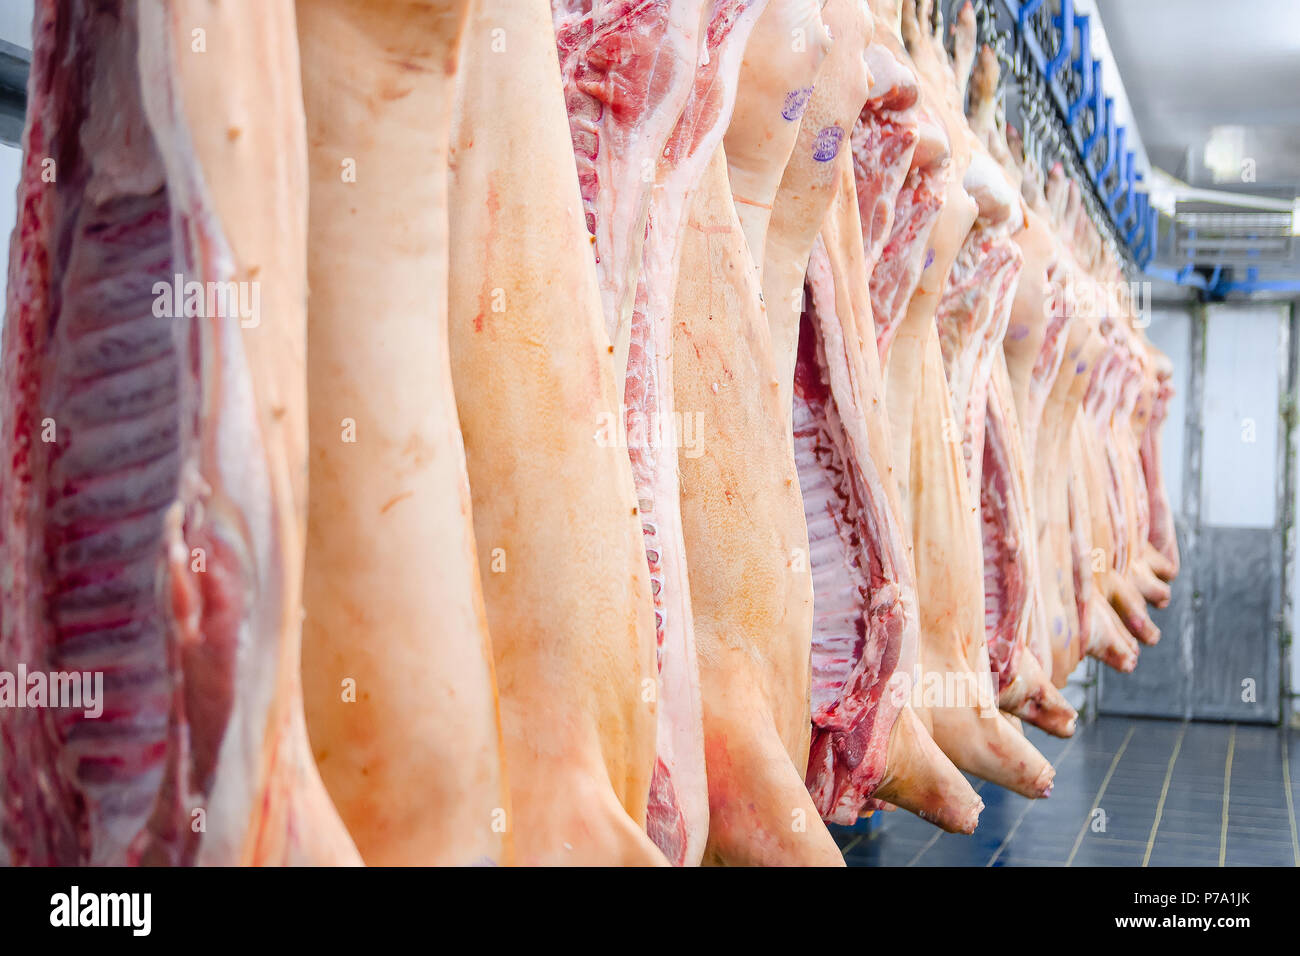 Beef half carcasses hanging on hooks in the slaughterhouse. Meat processing  plant, cutting meat. Stock Photo